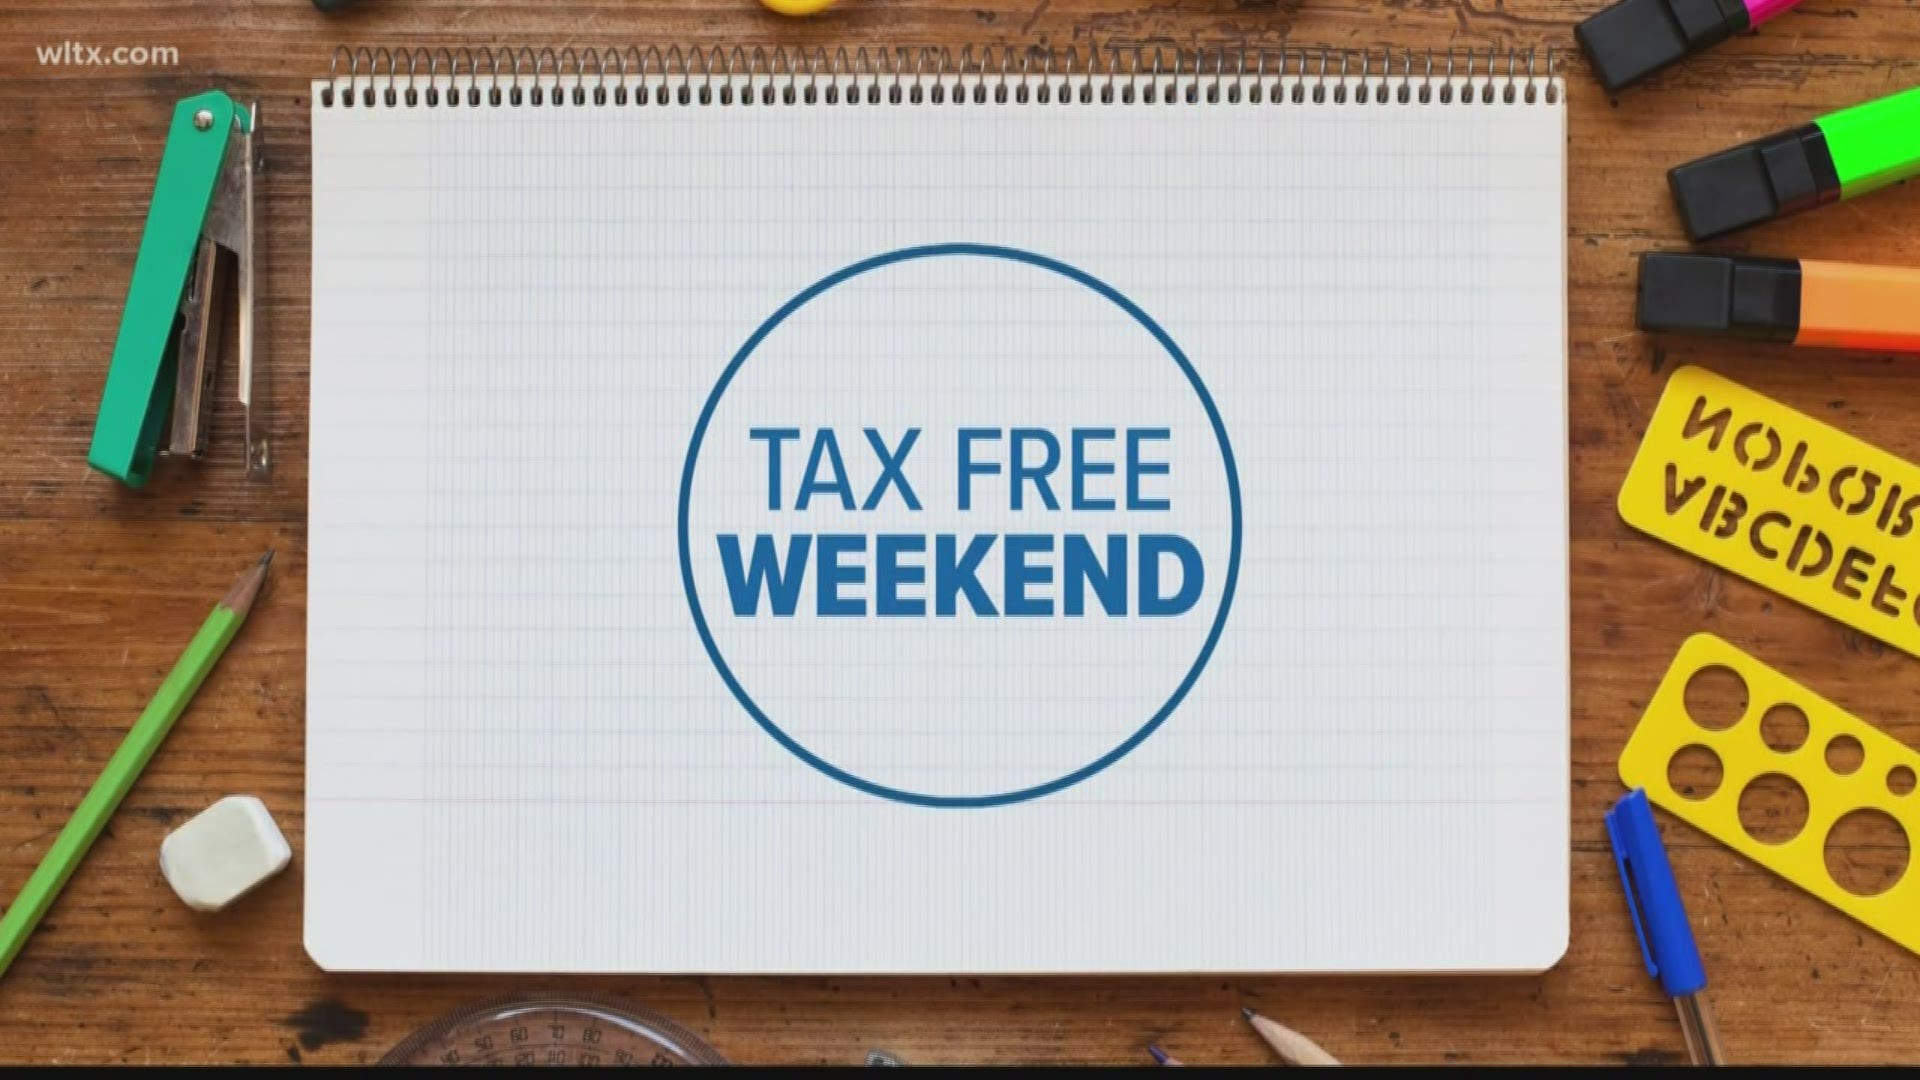 The "News19 This Morning" team provides all the information you need to know ahead of the 2019 Tax Free Weekend in South Carolina.